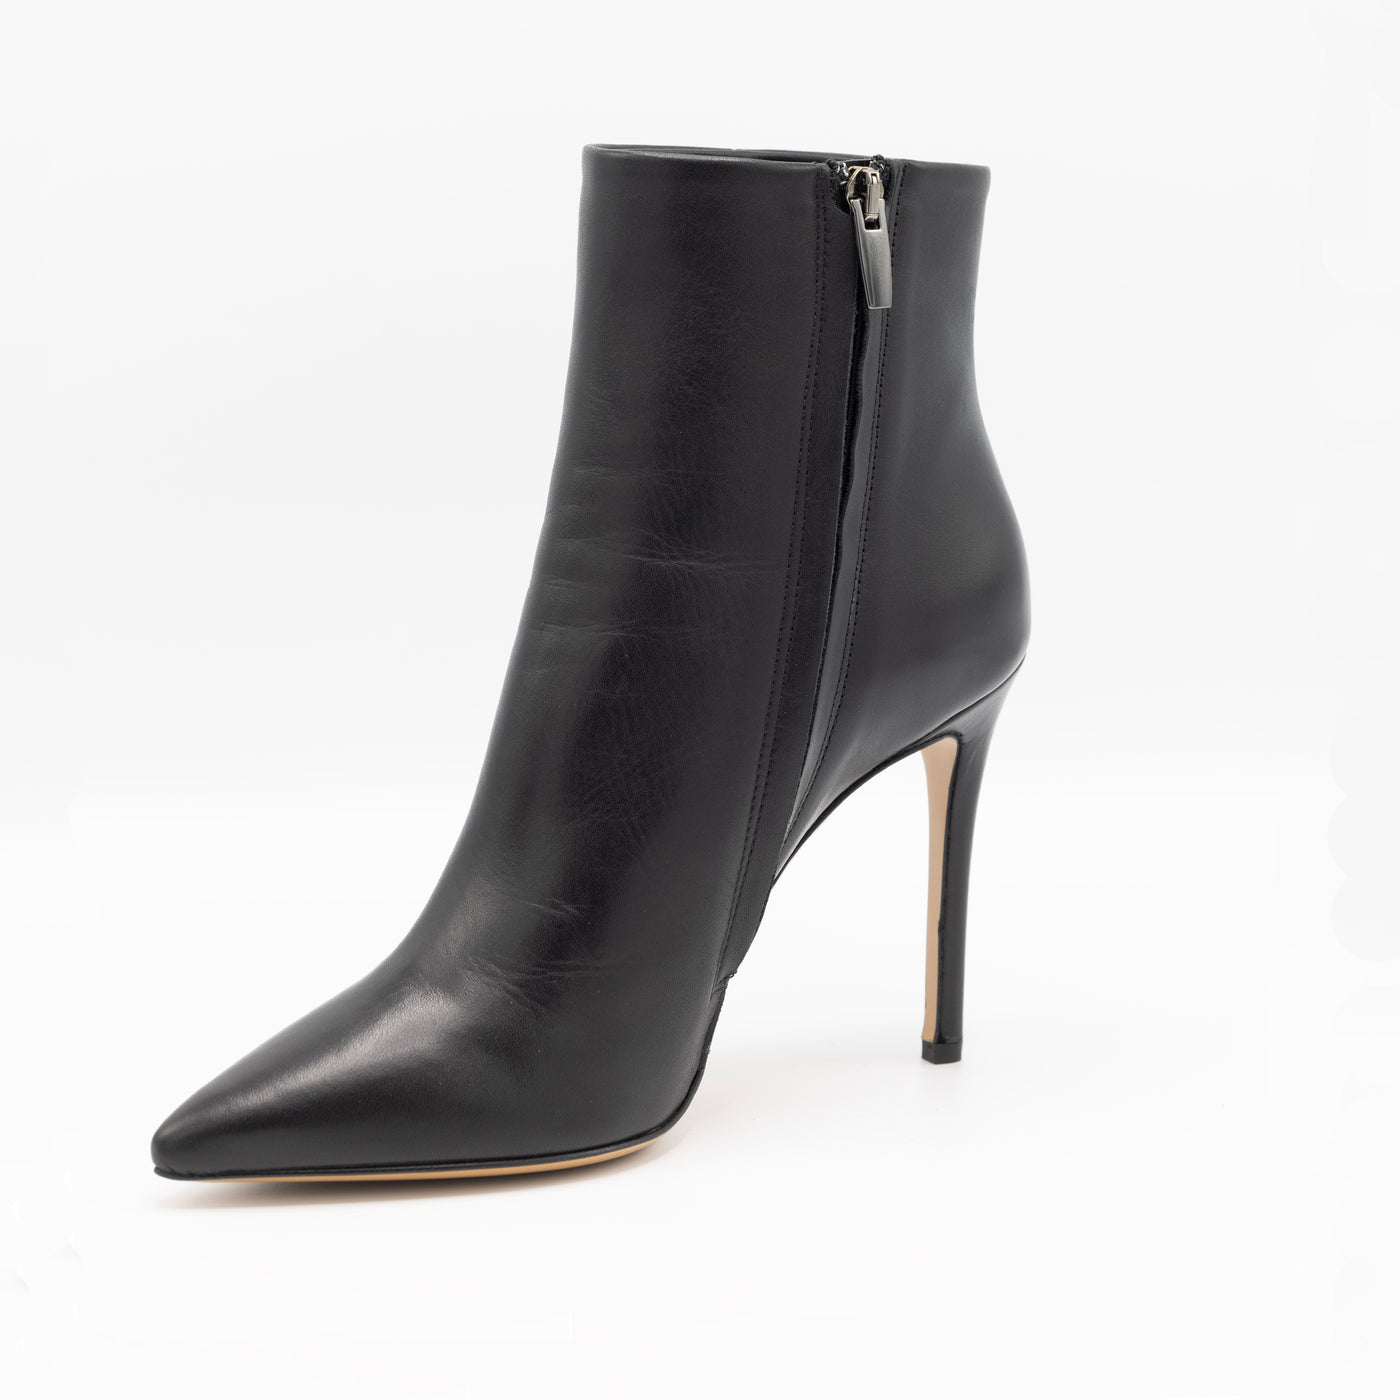 Heeled ankle Boot in Black Leather